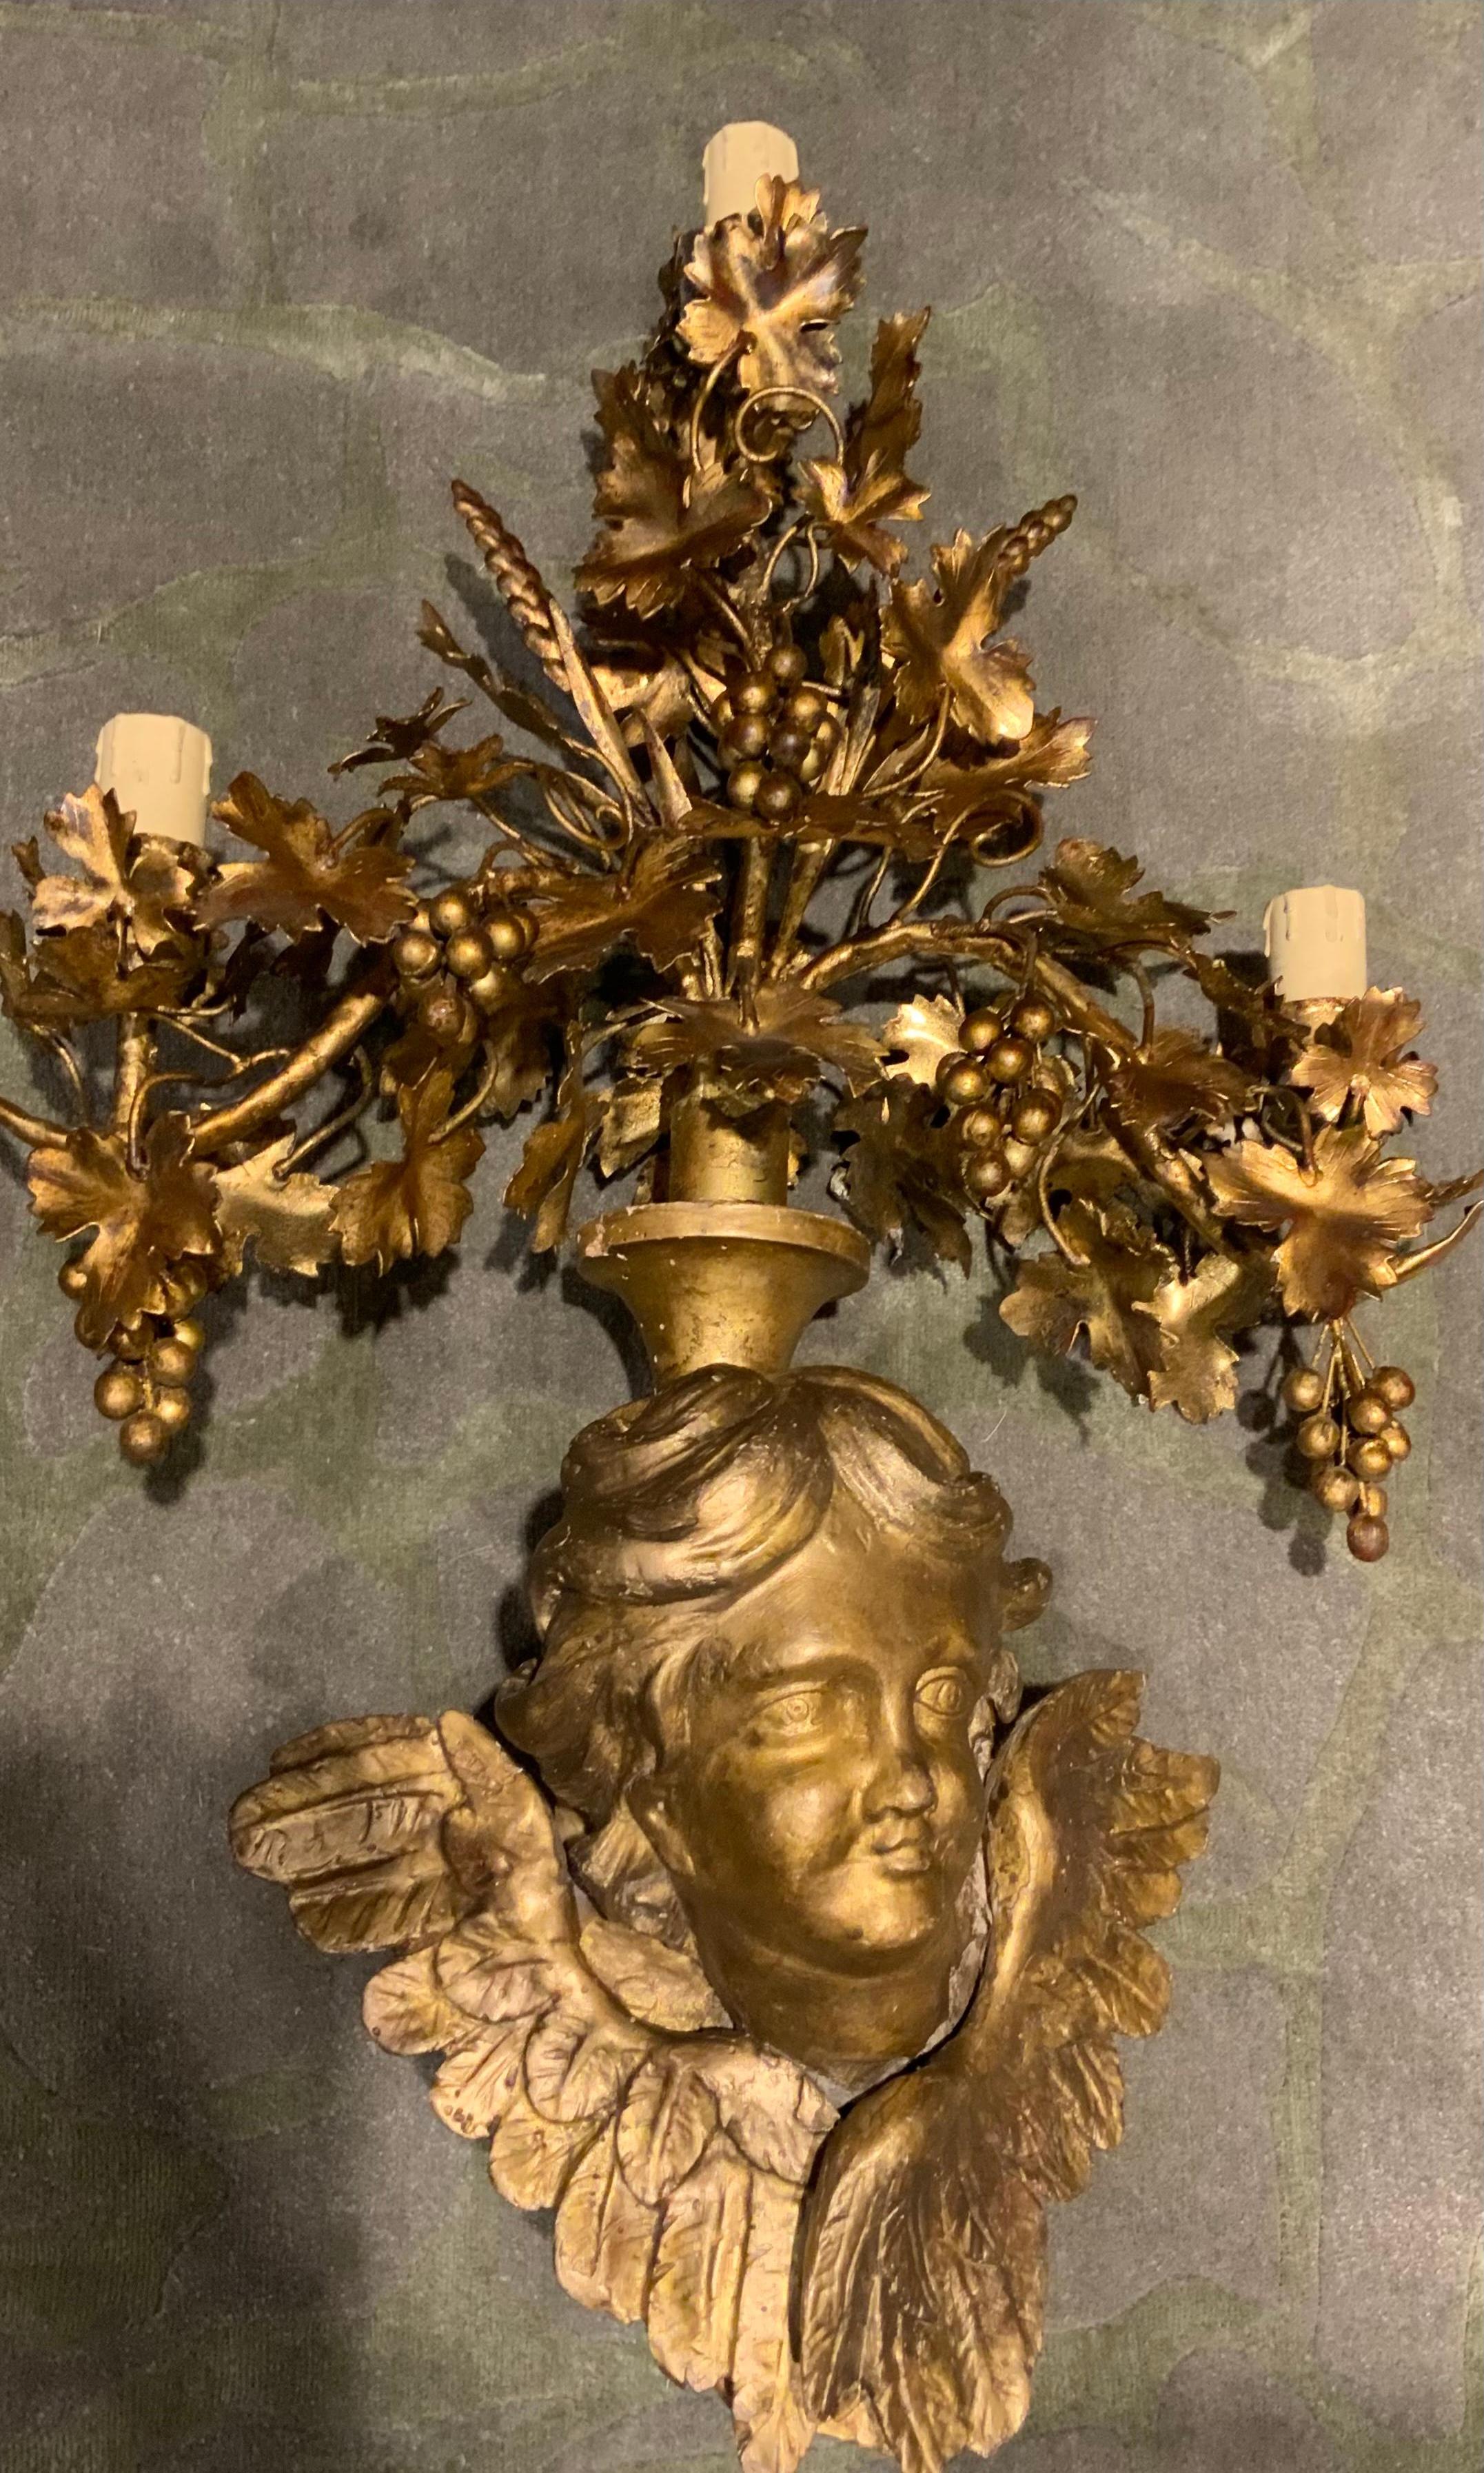 These sconces are special because of the age and beautifully 
Condition. The angel heads are well carved and gilded with
Lovely carved wings. The arms are gracefully curved in a 
Scrolling fashion and embellished with clusters of grapes.
Three